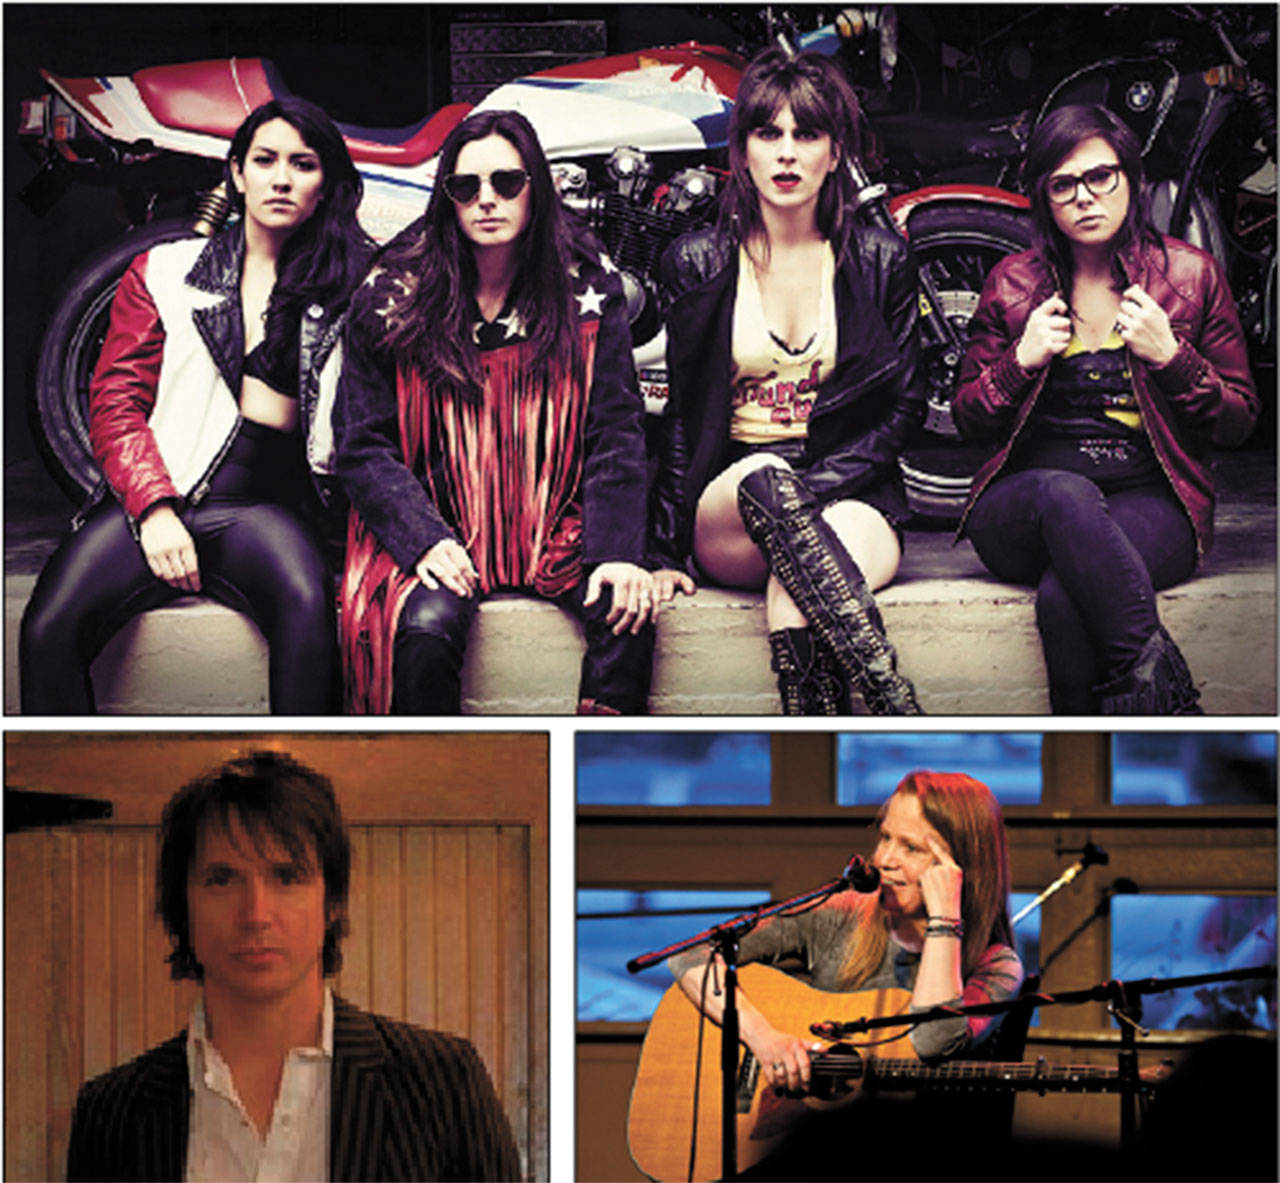 The long line up of musicians this weekend will include Seattle’s Thunderpussy, top, which Pearl Jam’s Mike McCready recently called his new favorite band, as well as much-loved island musicians Ian Moore, bottom left, and Kat Eggleston, bottom right. (Courtesy Photos)